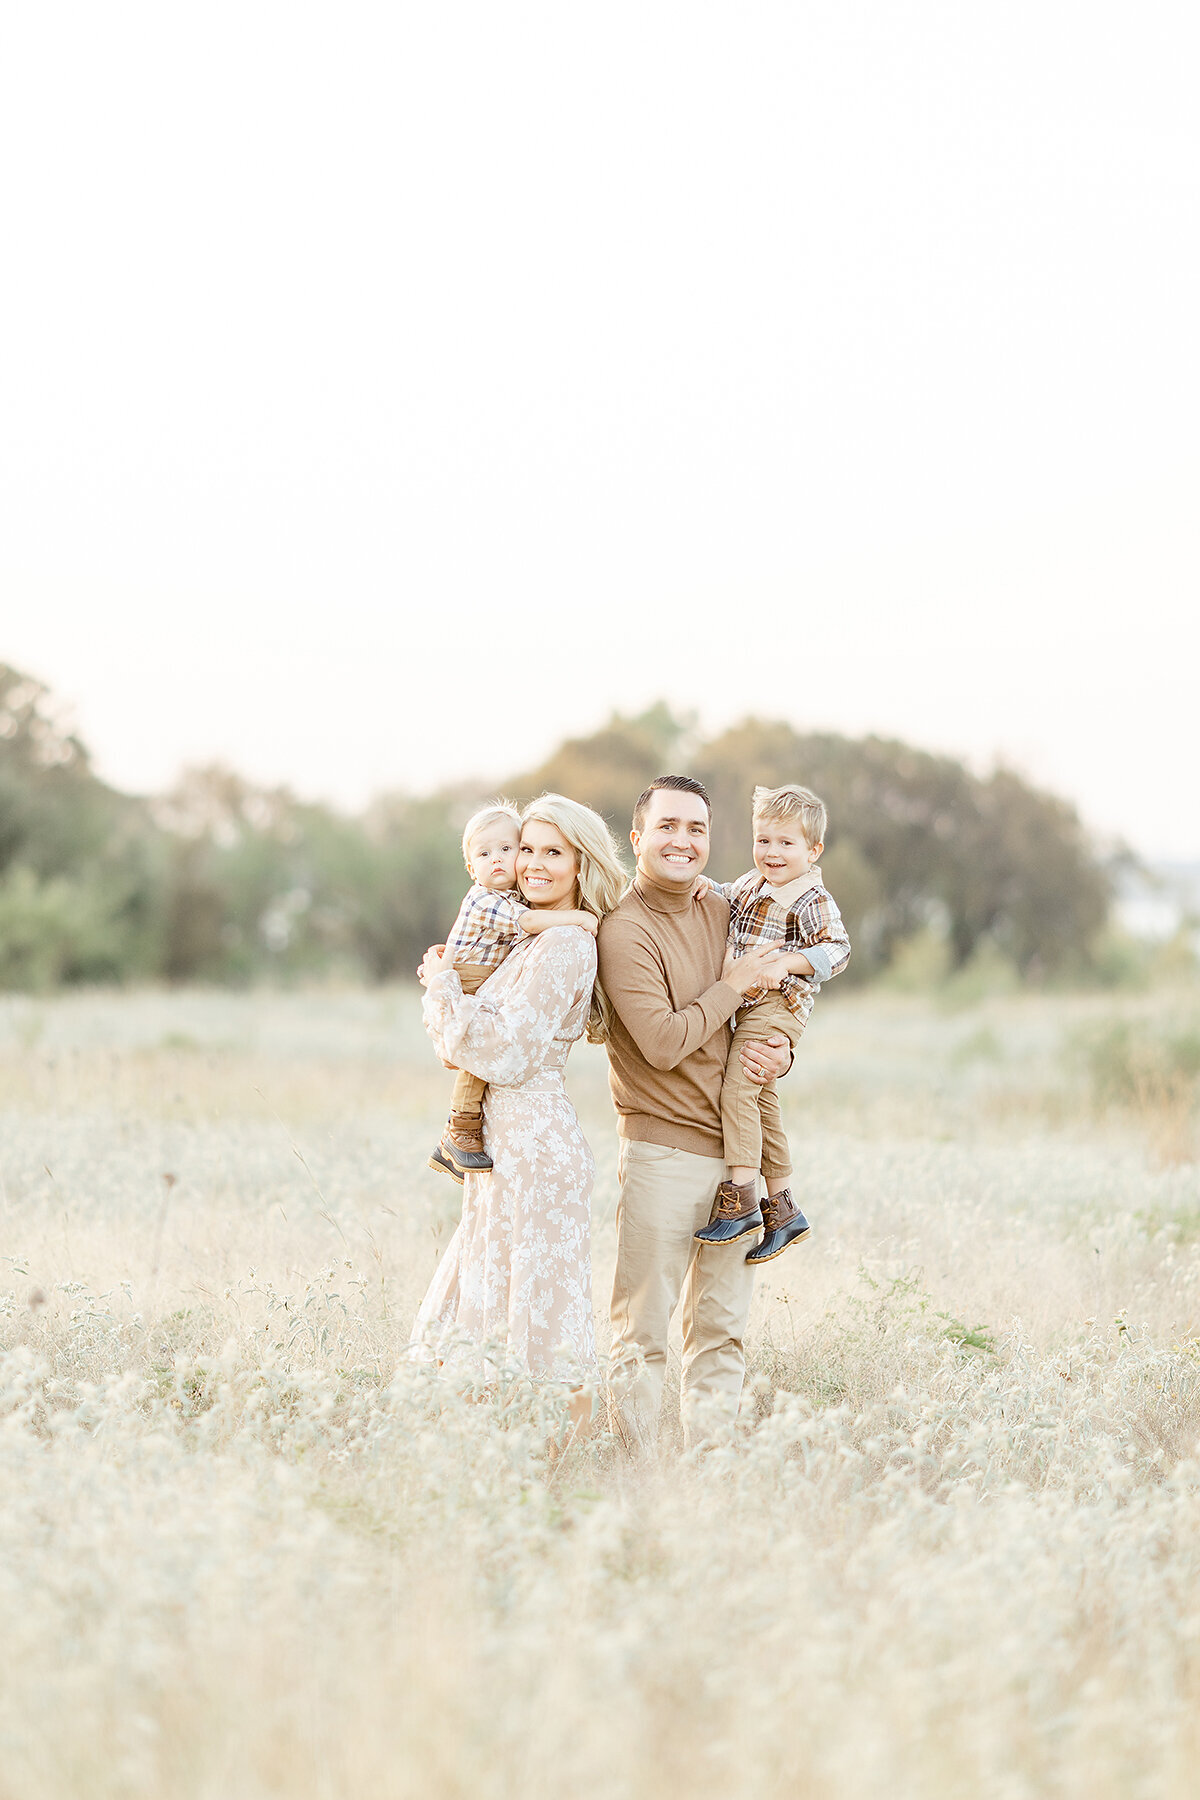 Beautiful family portrait of a mother and father holding their two young boys as they look and pose for family photos in the middle of an open field at a DFW park.